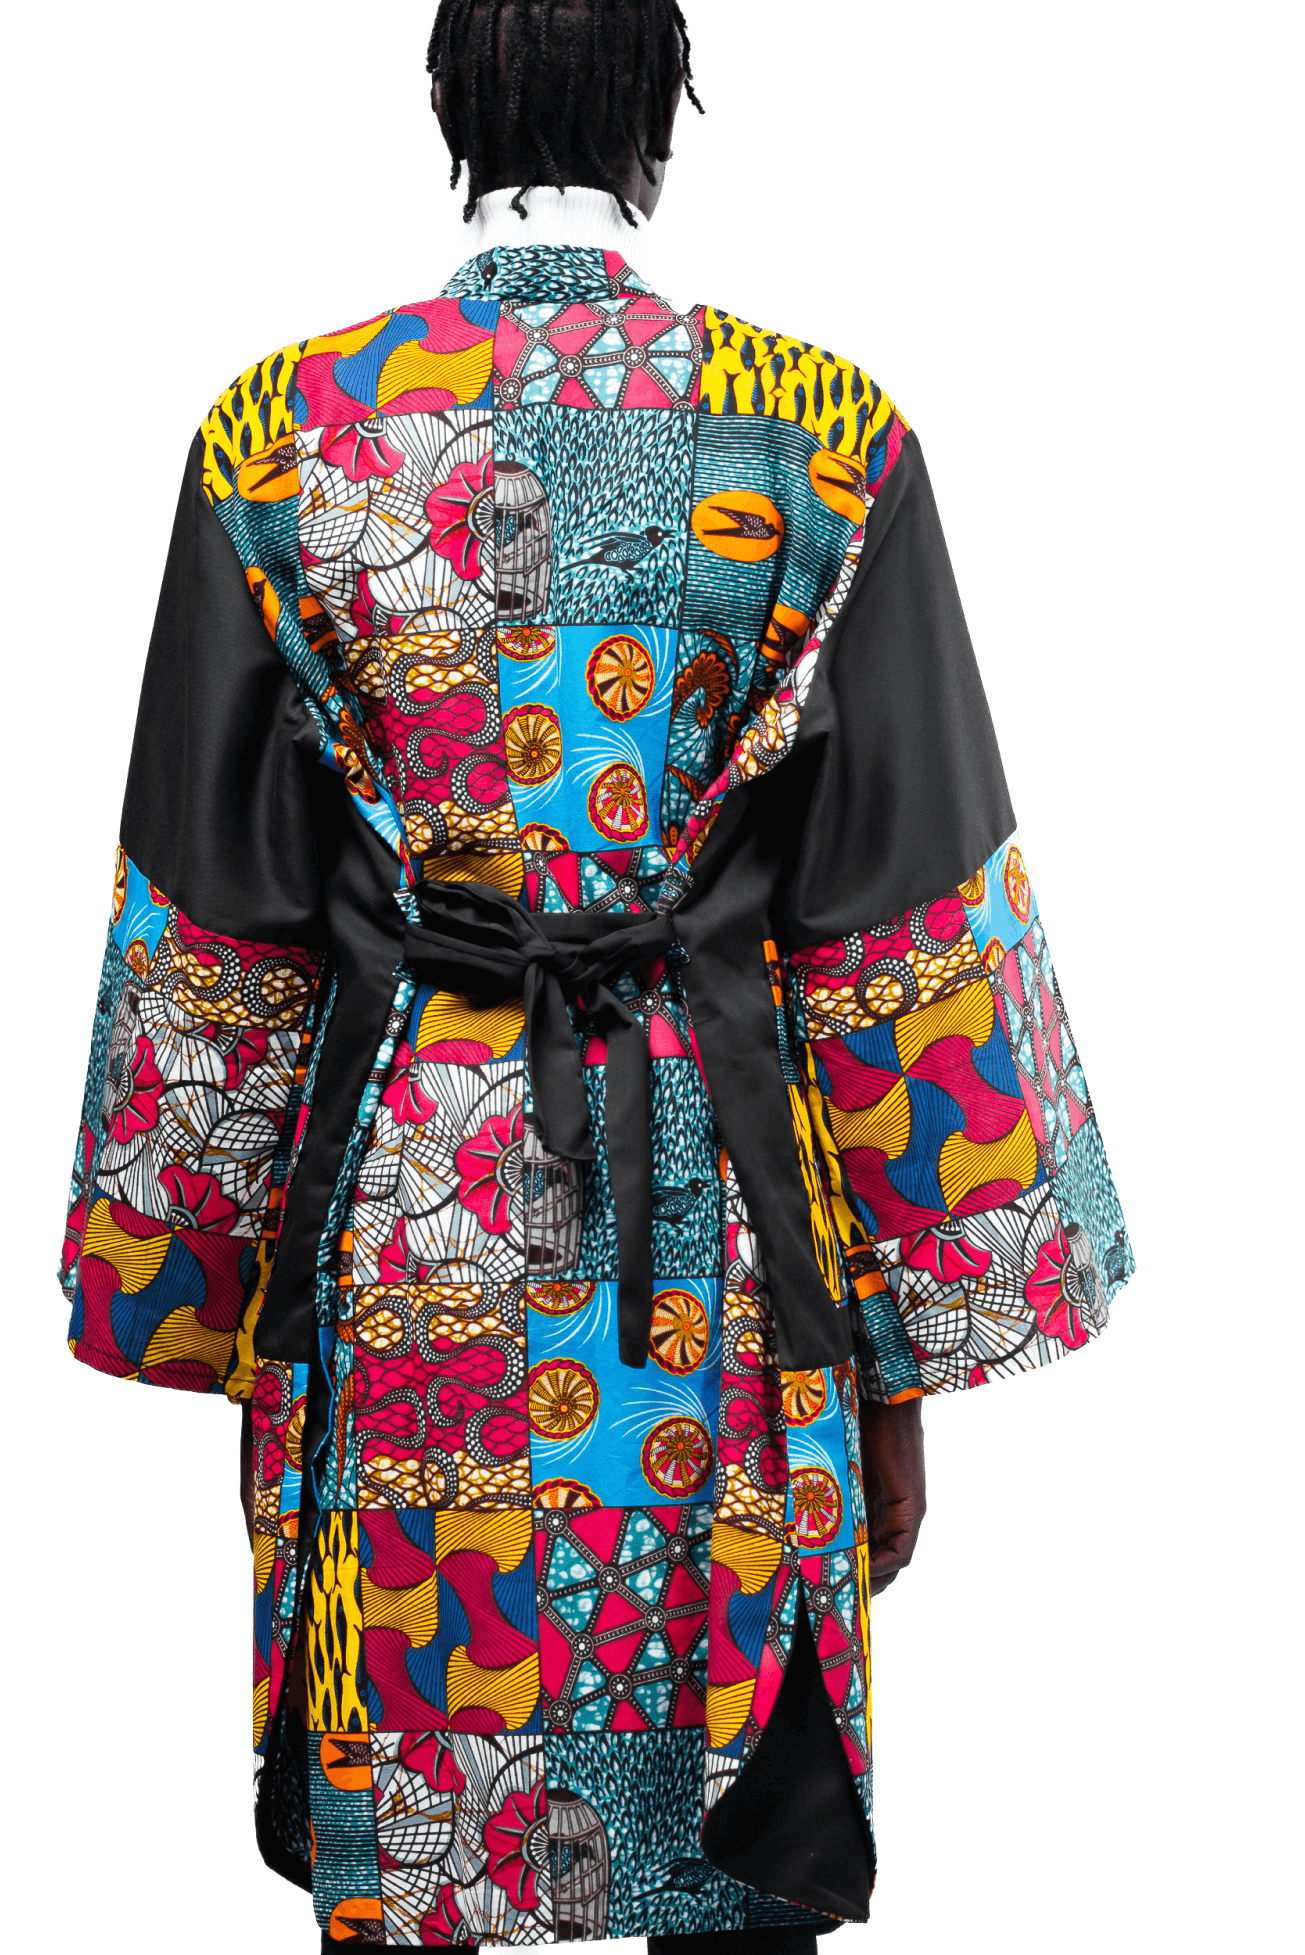 Shop The Dun's Patchwork Kimono by ELISKIS on Arrai. Discover stylish, affordable clothing, jewelry, handbags and unique handmade pieces from top Kenyan & African fashion brands prioritising sustainability and quality craftsmanship.